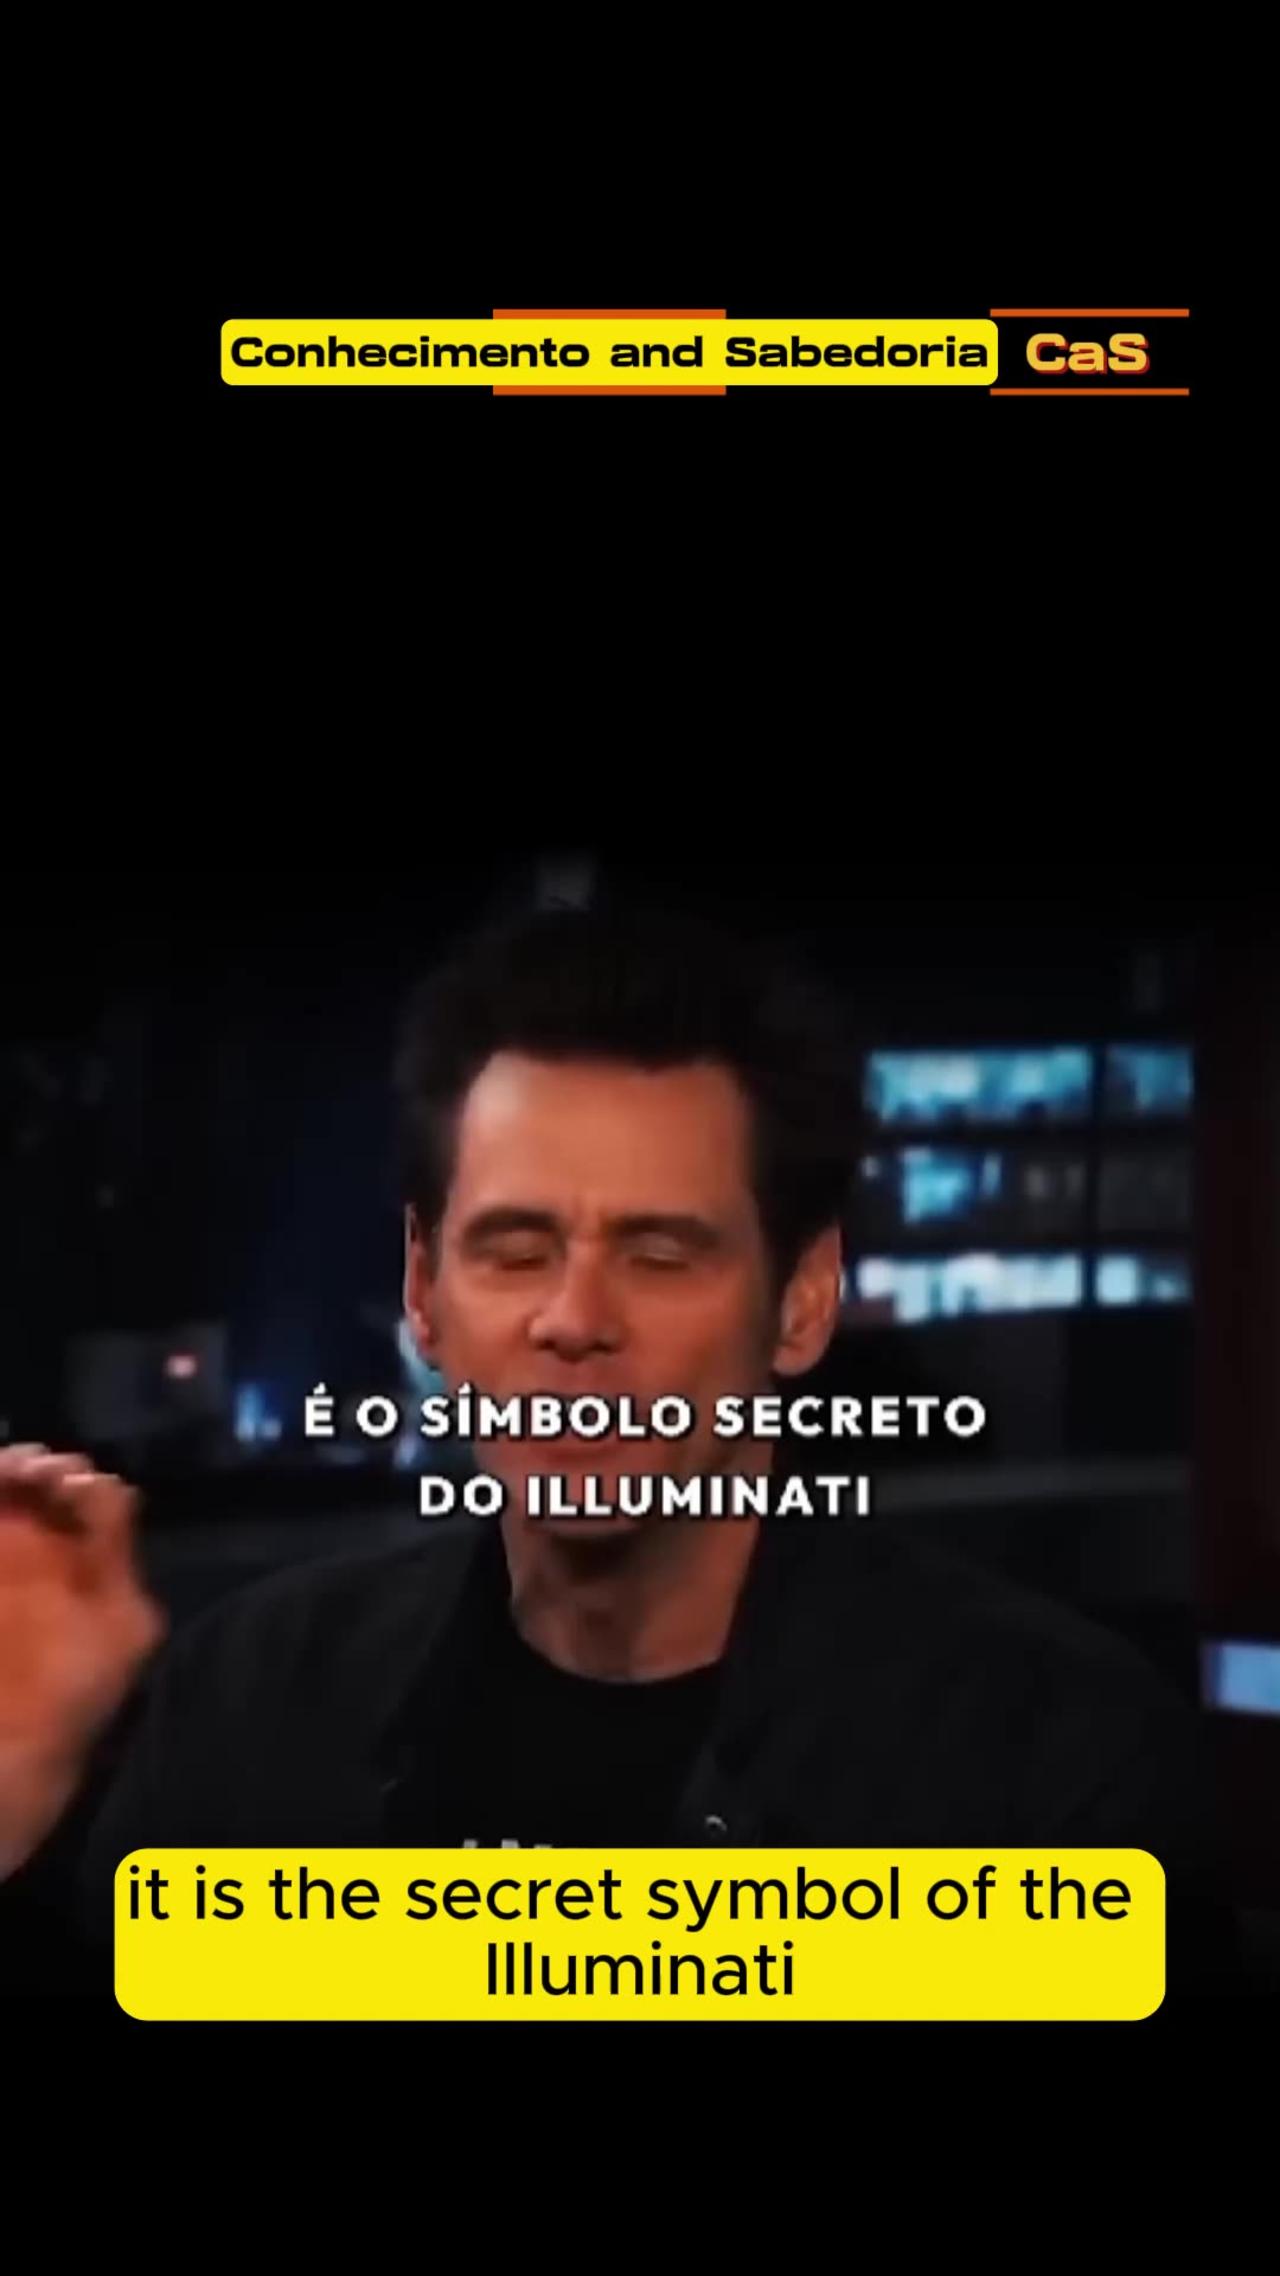 SHORT - SENSATIONAL COURAGEOUS Jim Carrey, reported trying to rule the ILLUMINATI world